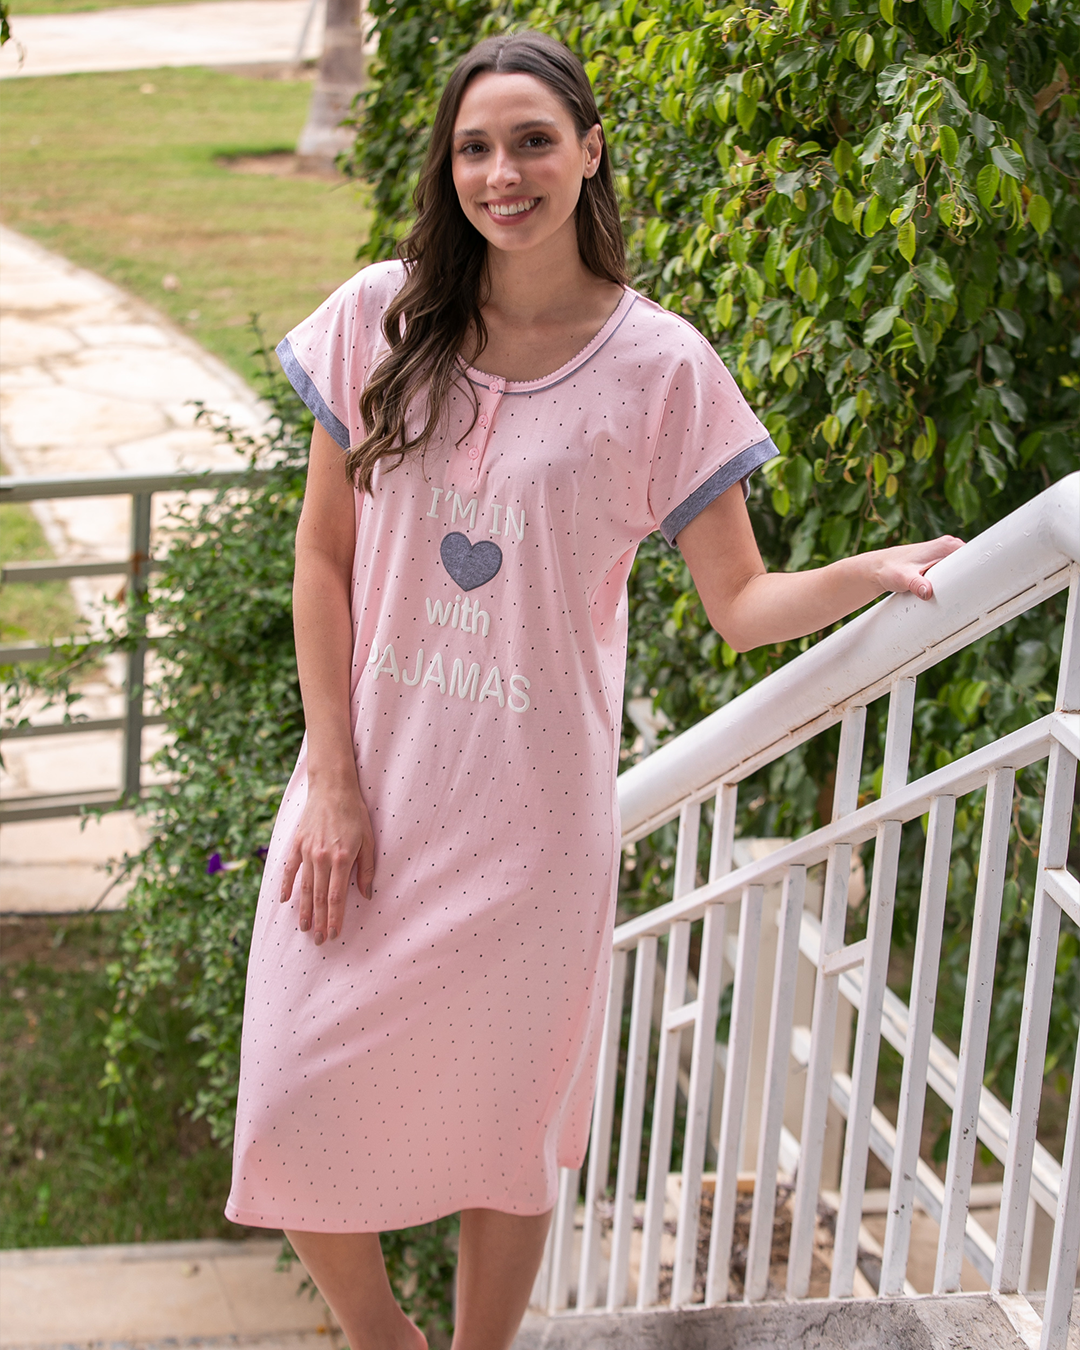 im in with pajamas women's polka dot nightgown